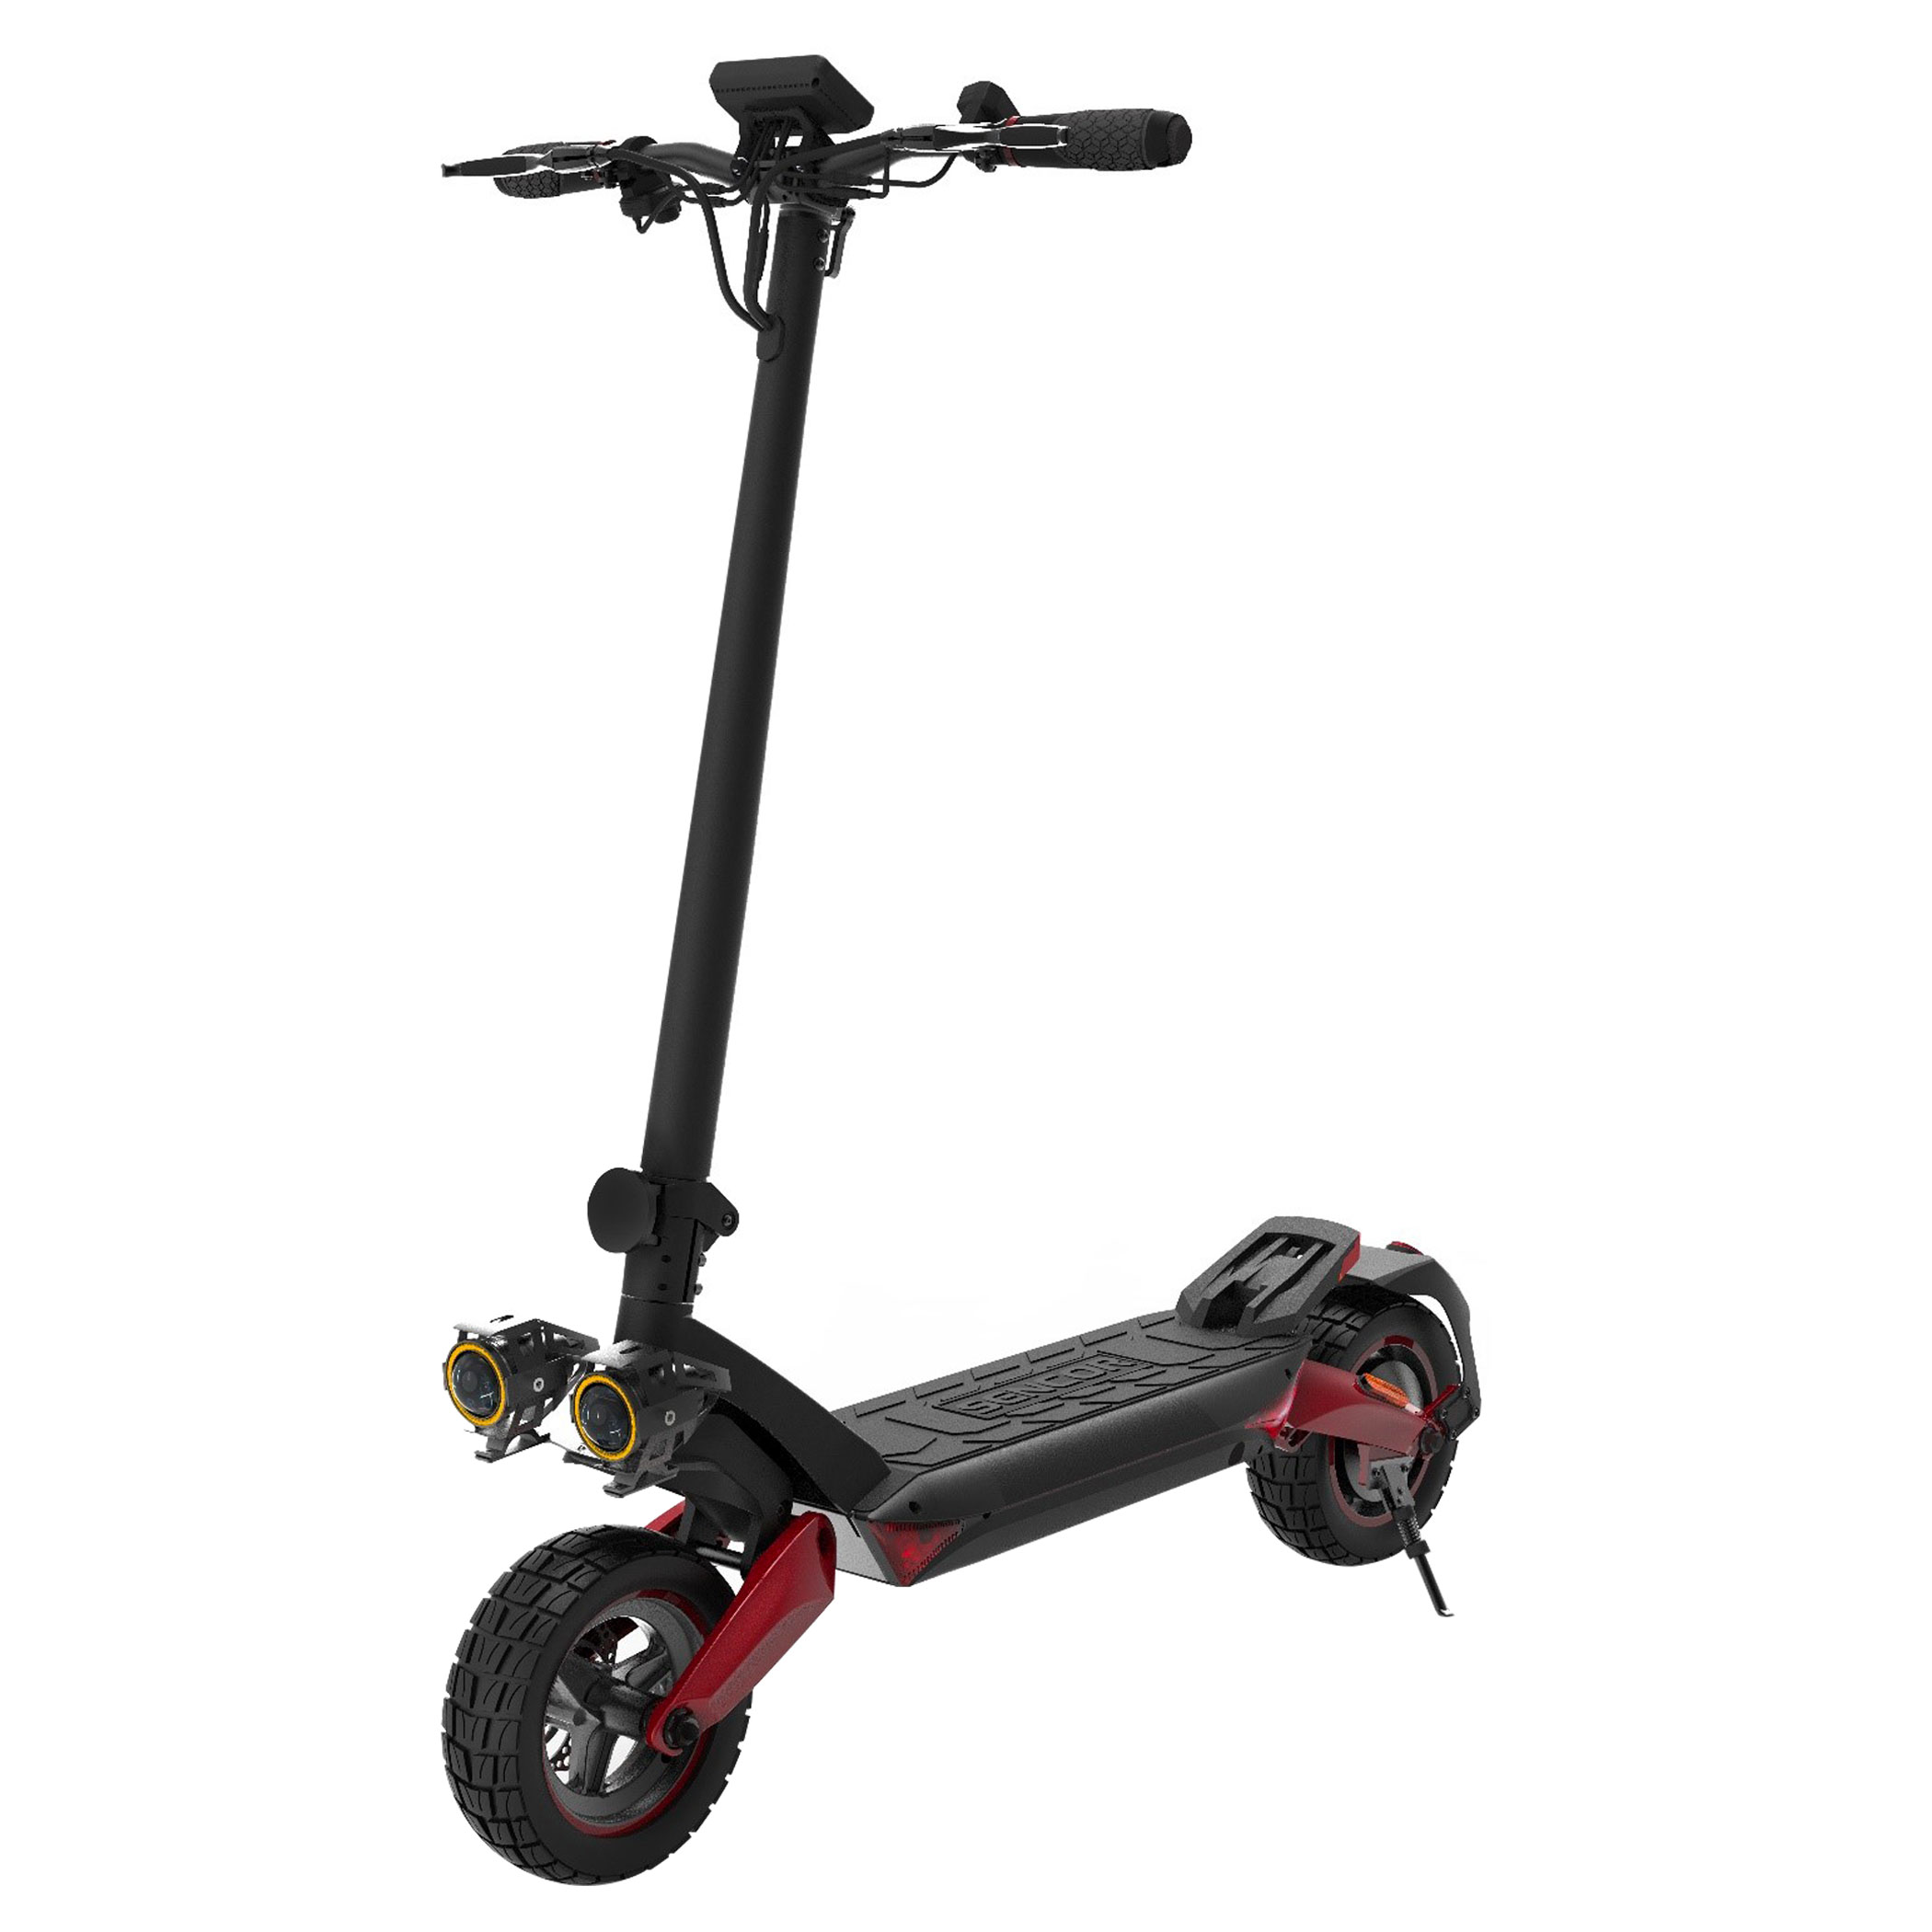 Scooter | SCOOTER X50 | Sencor